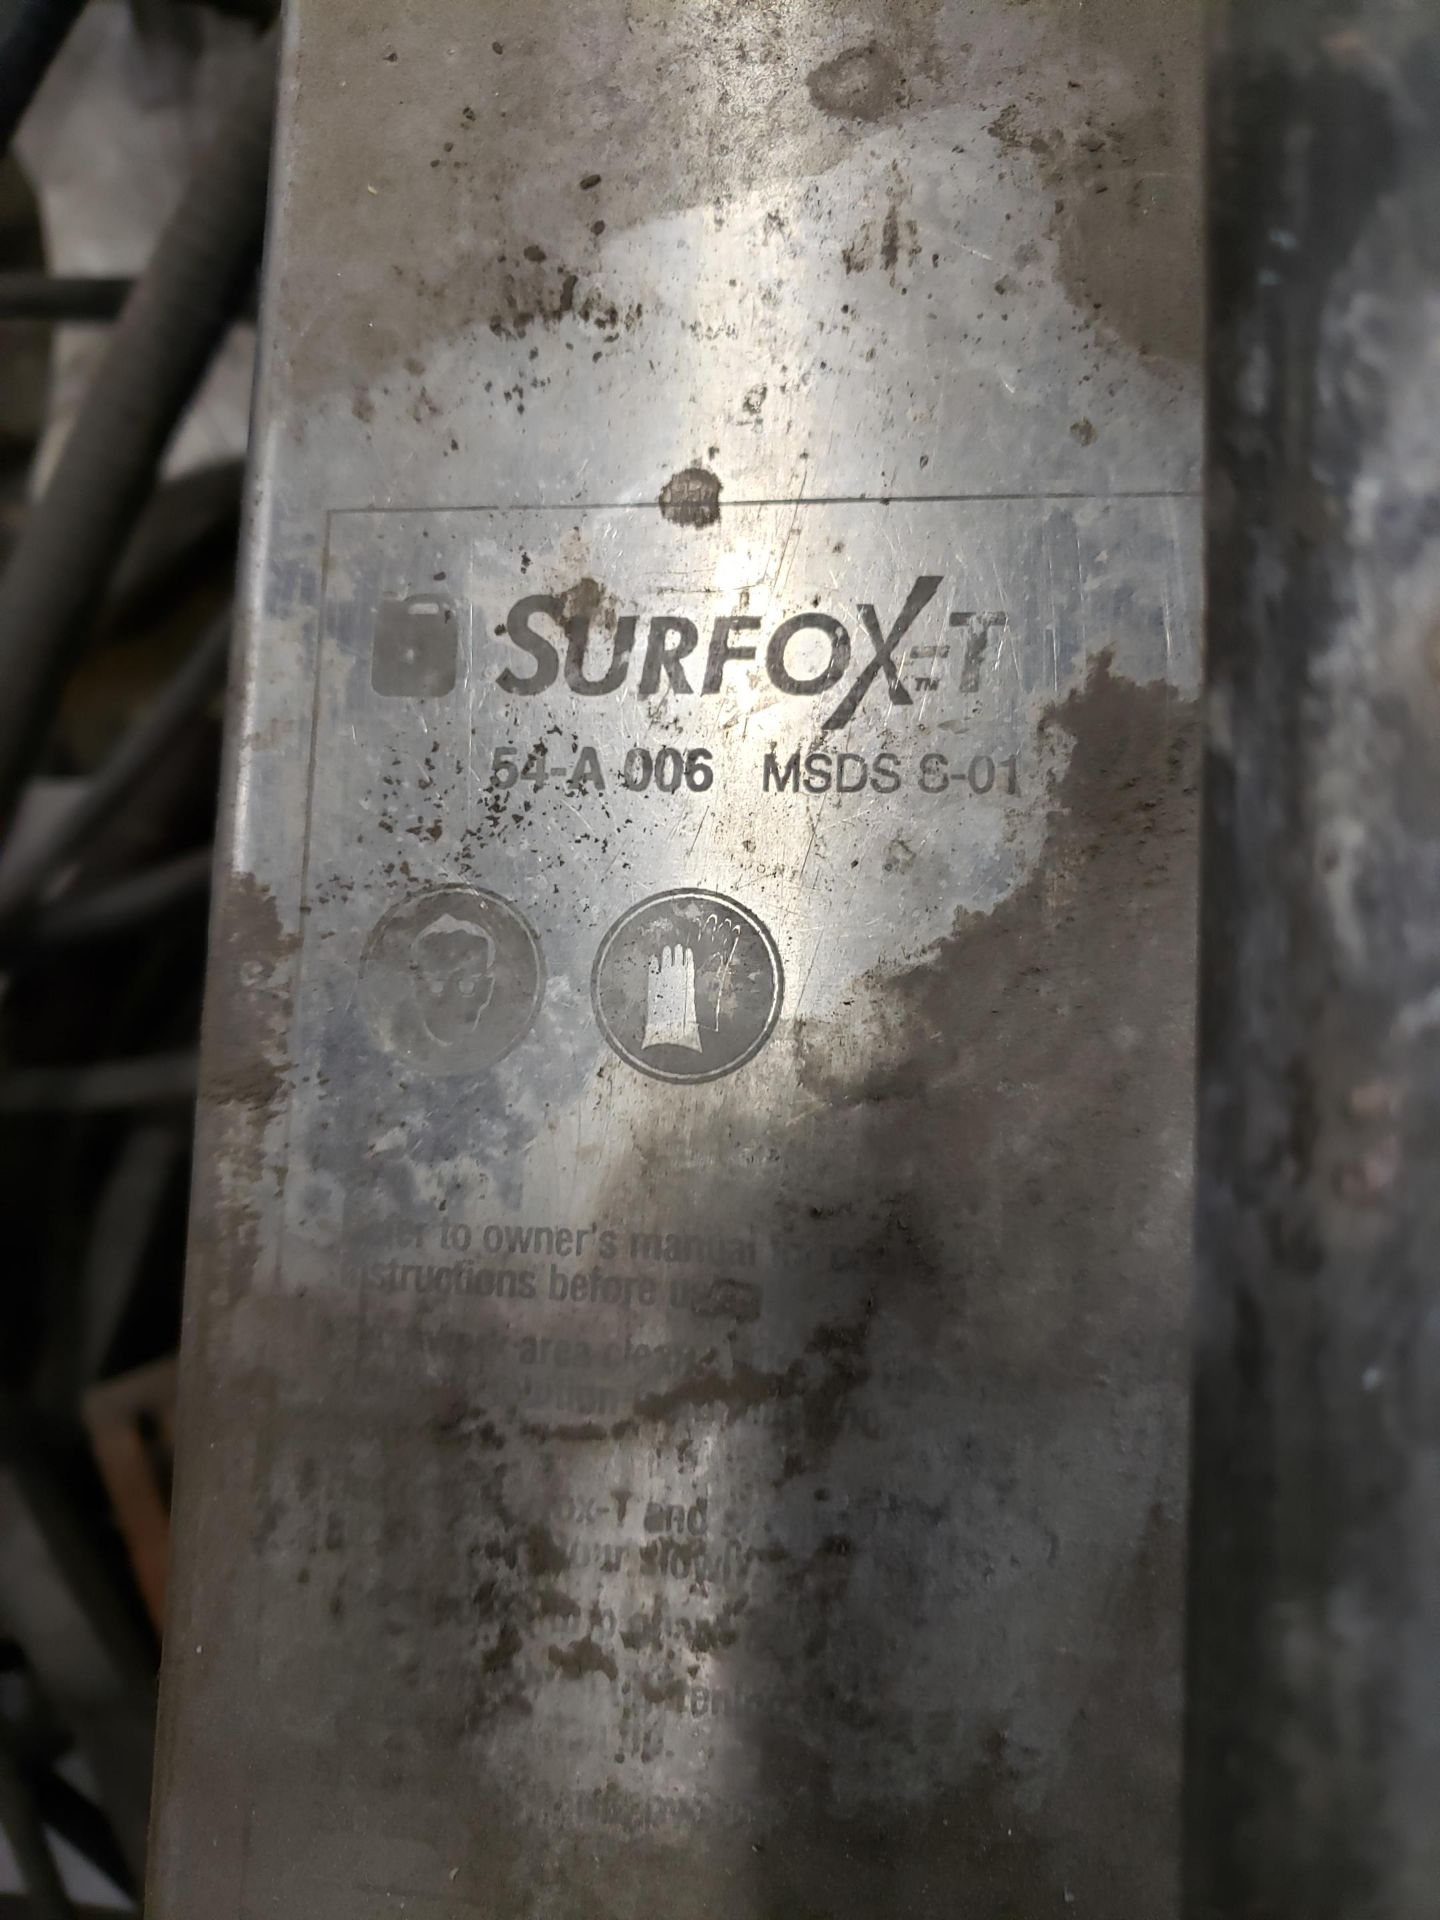 Lot of Walter SurFox 101 Weld Cleaning Systems - Image 2 of 9